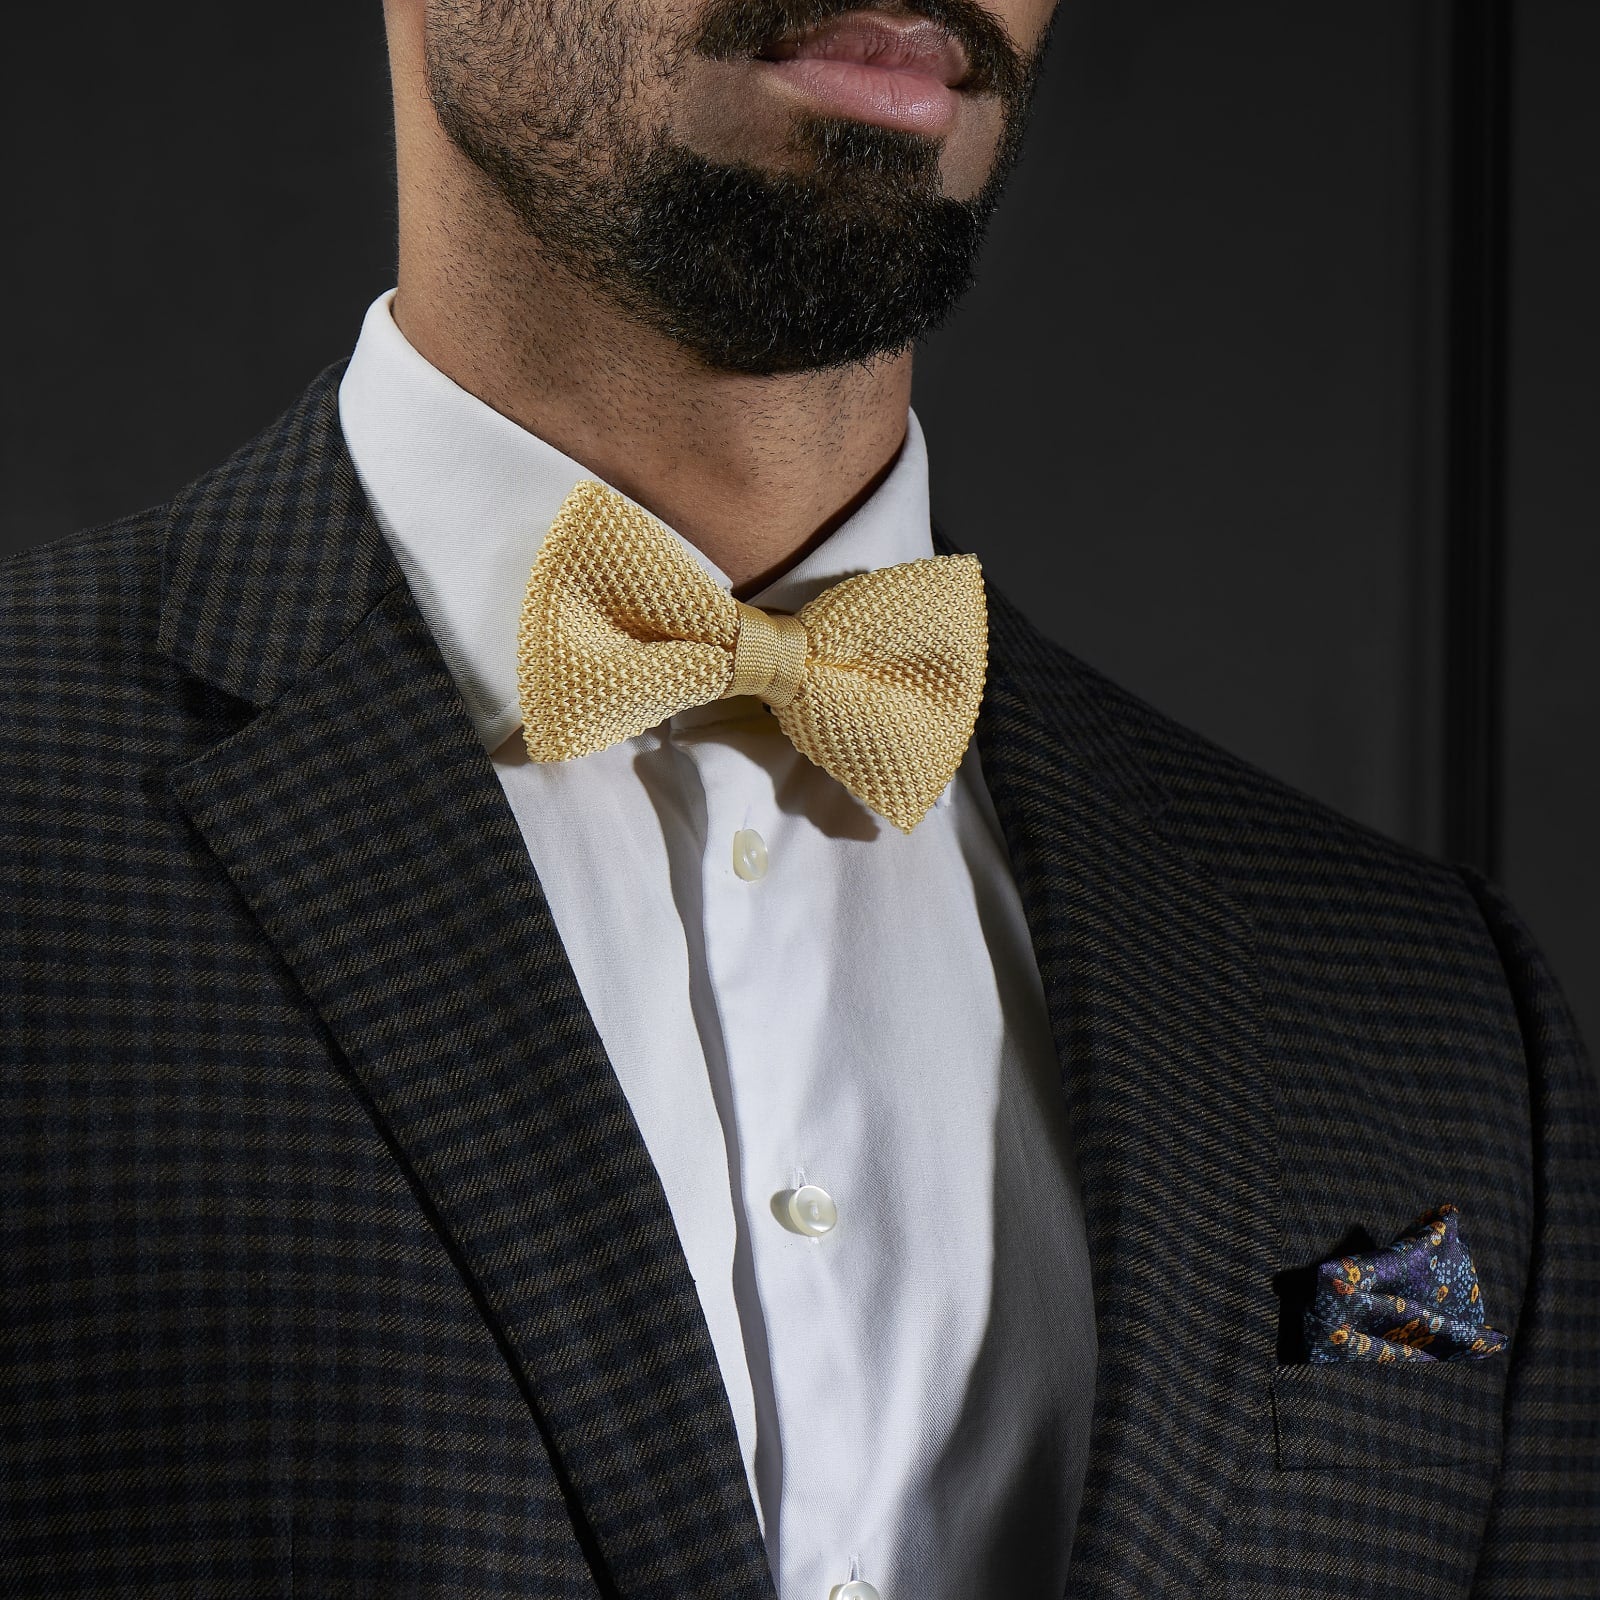 SOFT YELLOW KNITTED BOW TIES